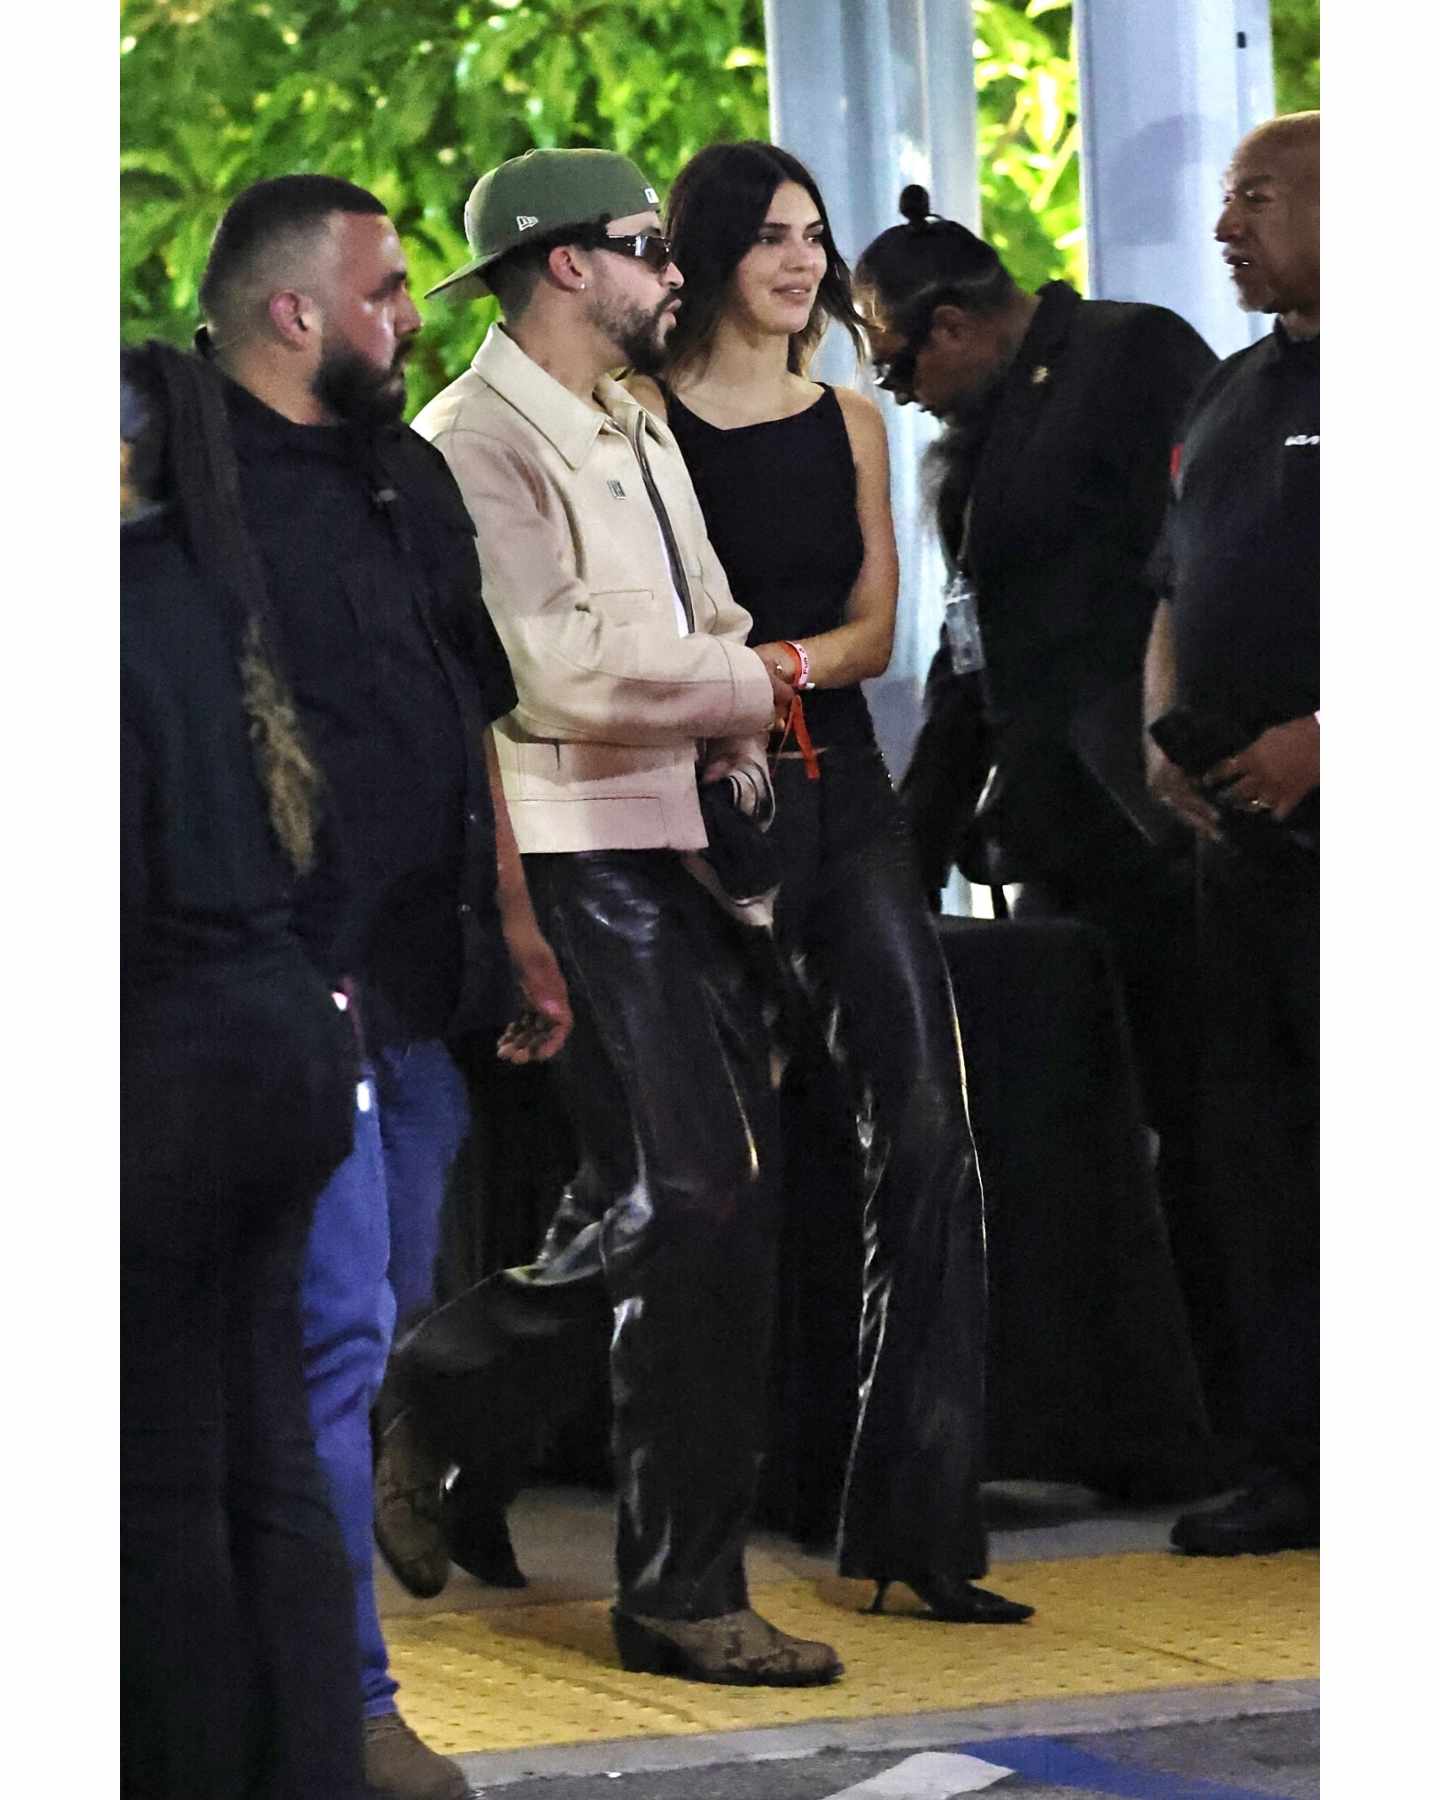 Kendall Jenner & Bad Bunny's Drink & Drake in Matching Pants